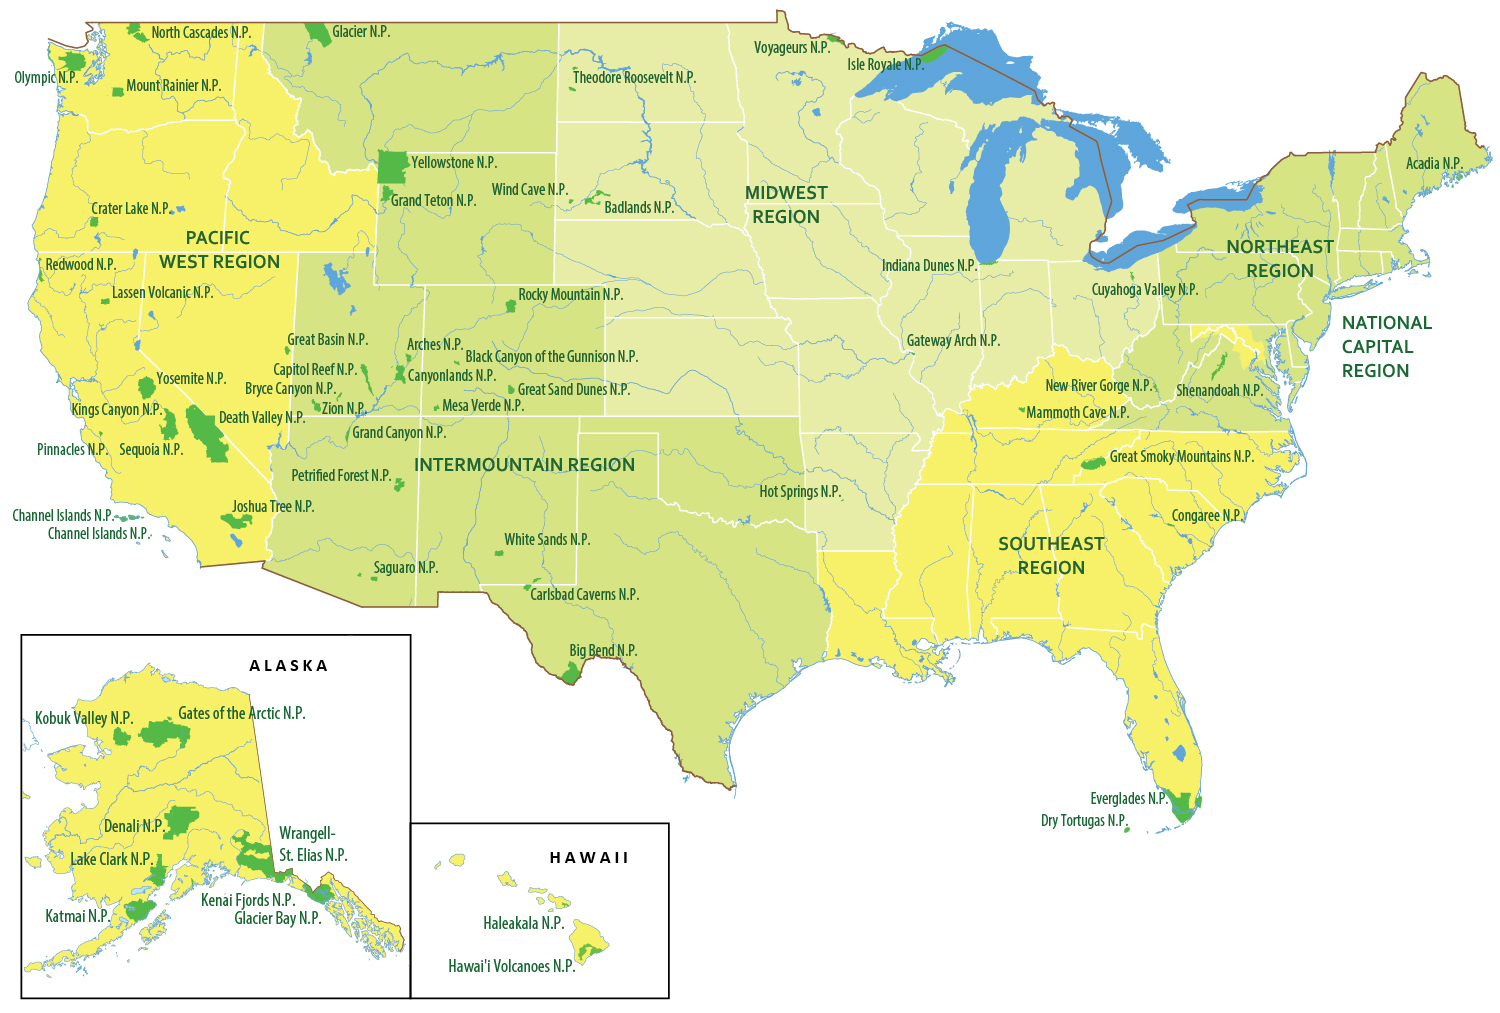 US National Parks Map - GIS Geography